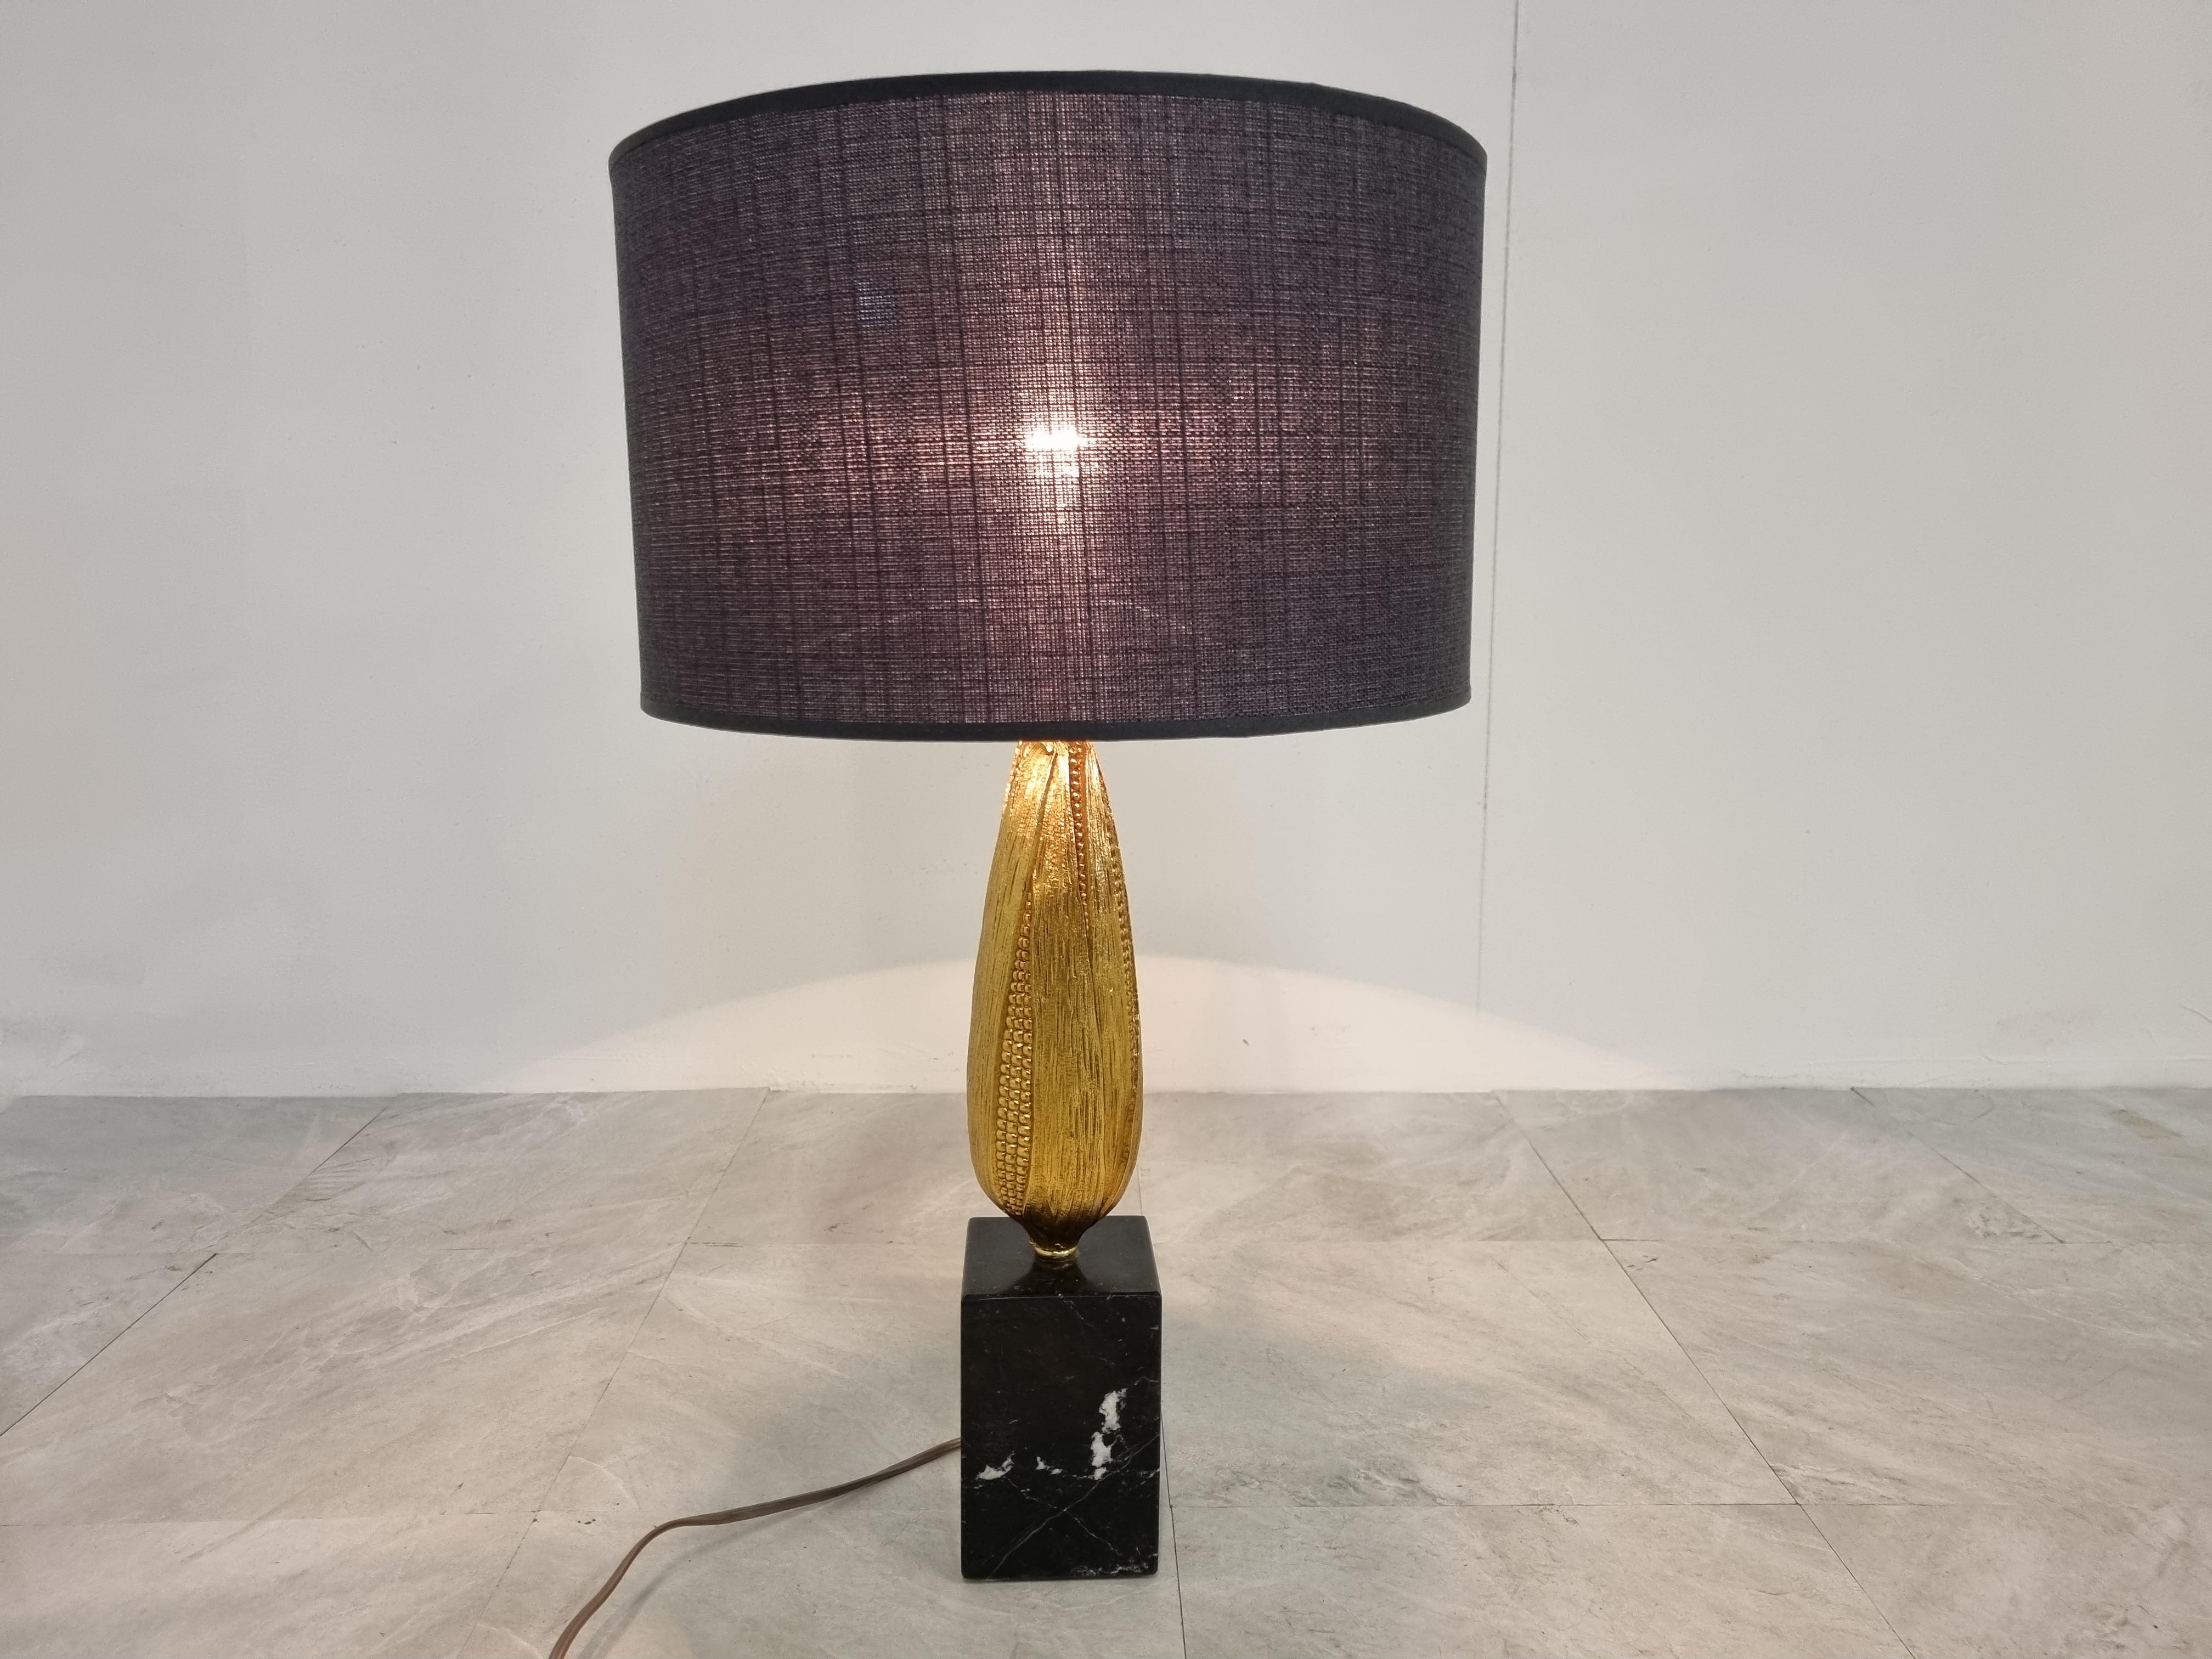 Charming corn table lamp.

The corn sculpture is made of brass and is nicely detailed.

Black and white veined marble base and a new lamp shade.

Lamp is tested and ready to use with a single E27 lighbubl. Works all over the world.

1970s -